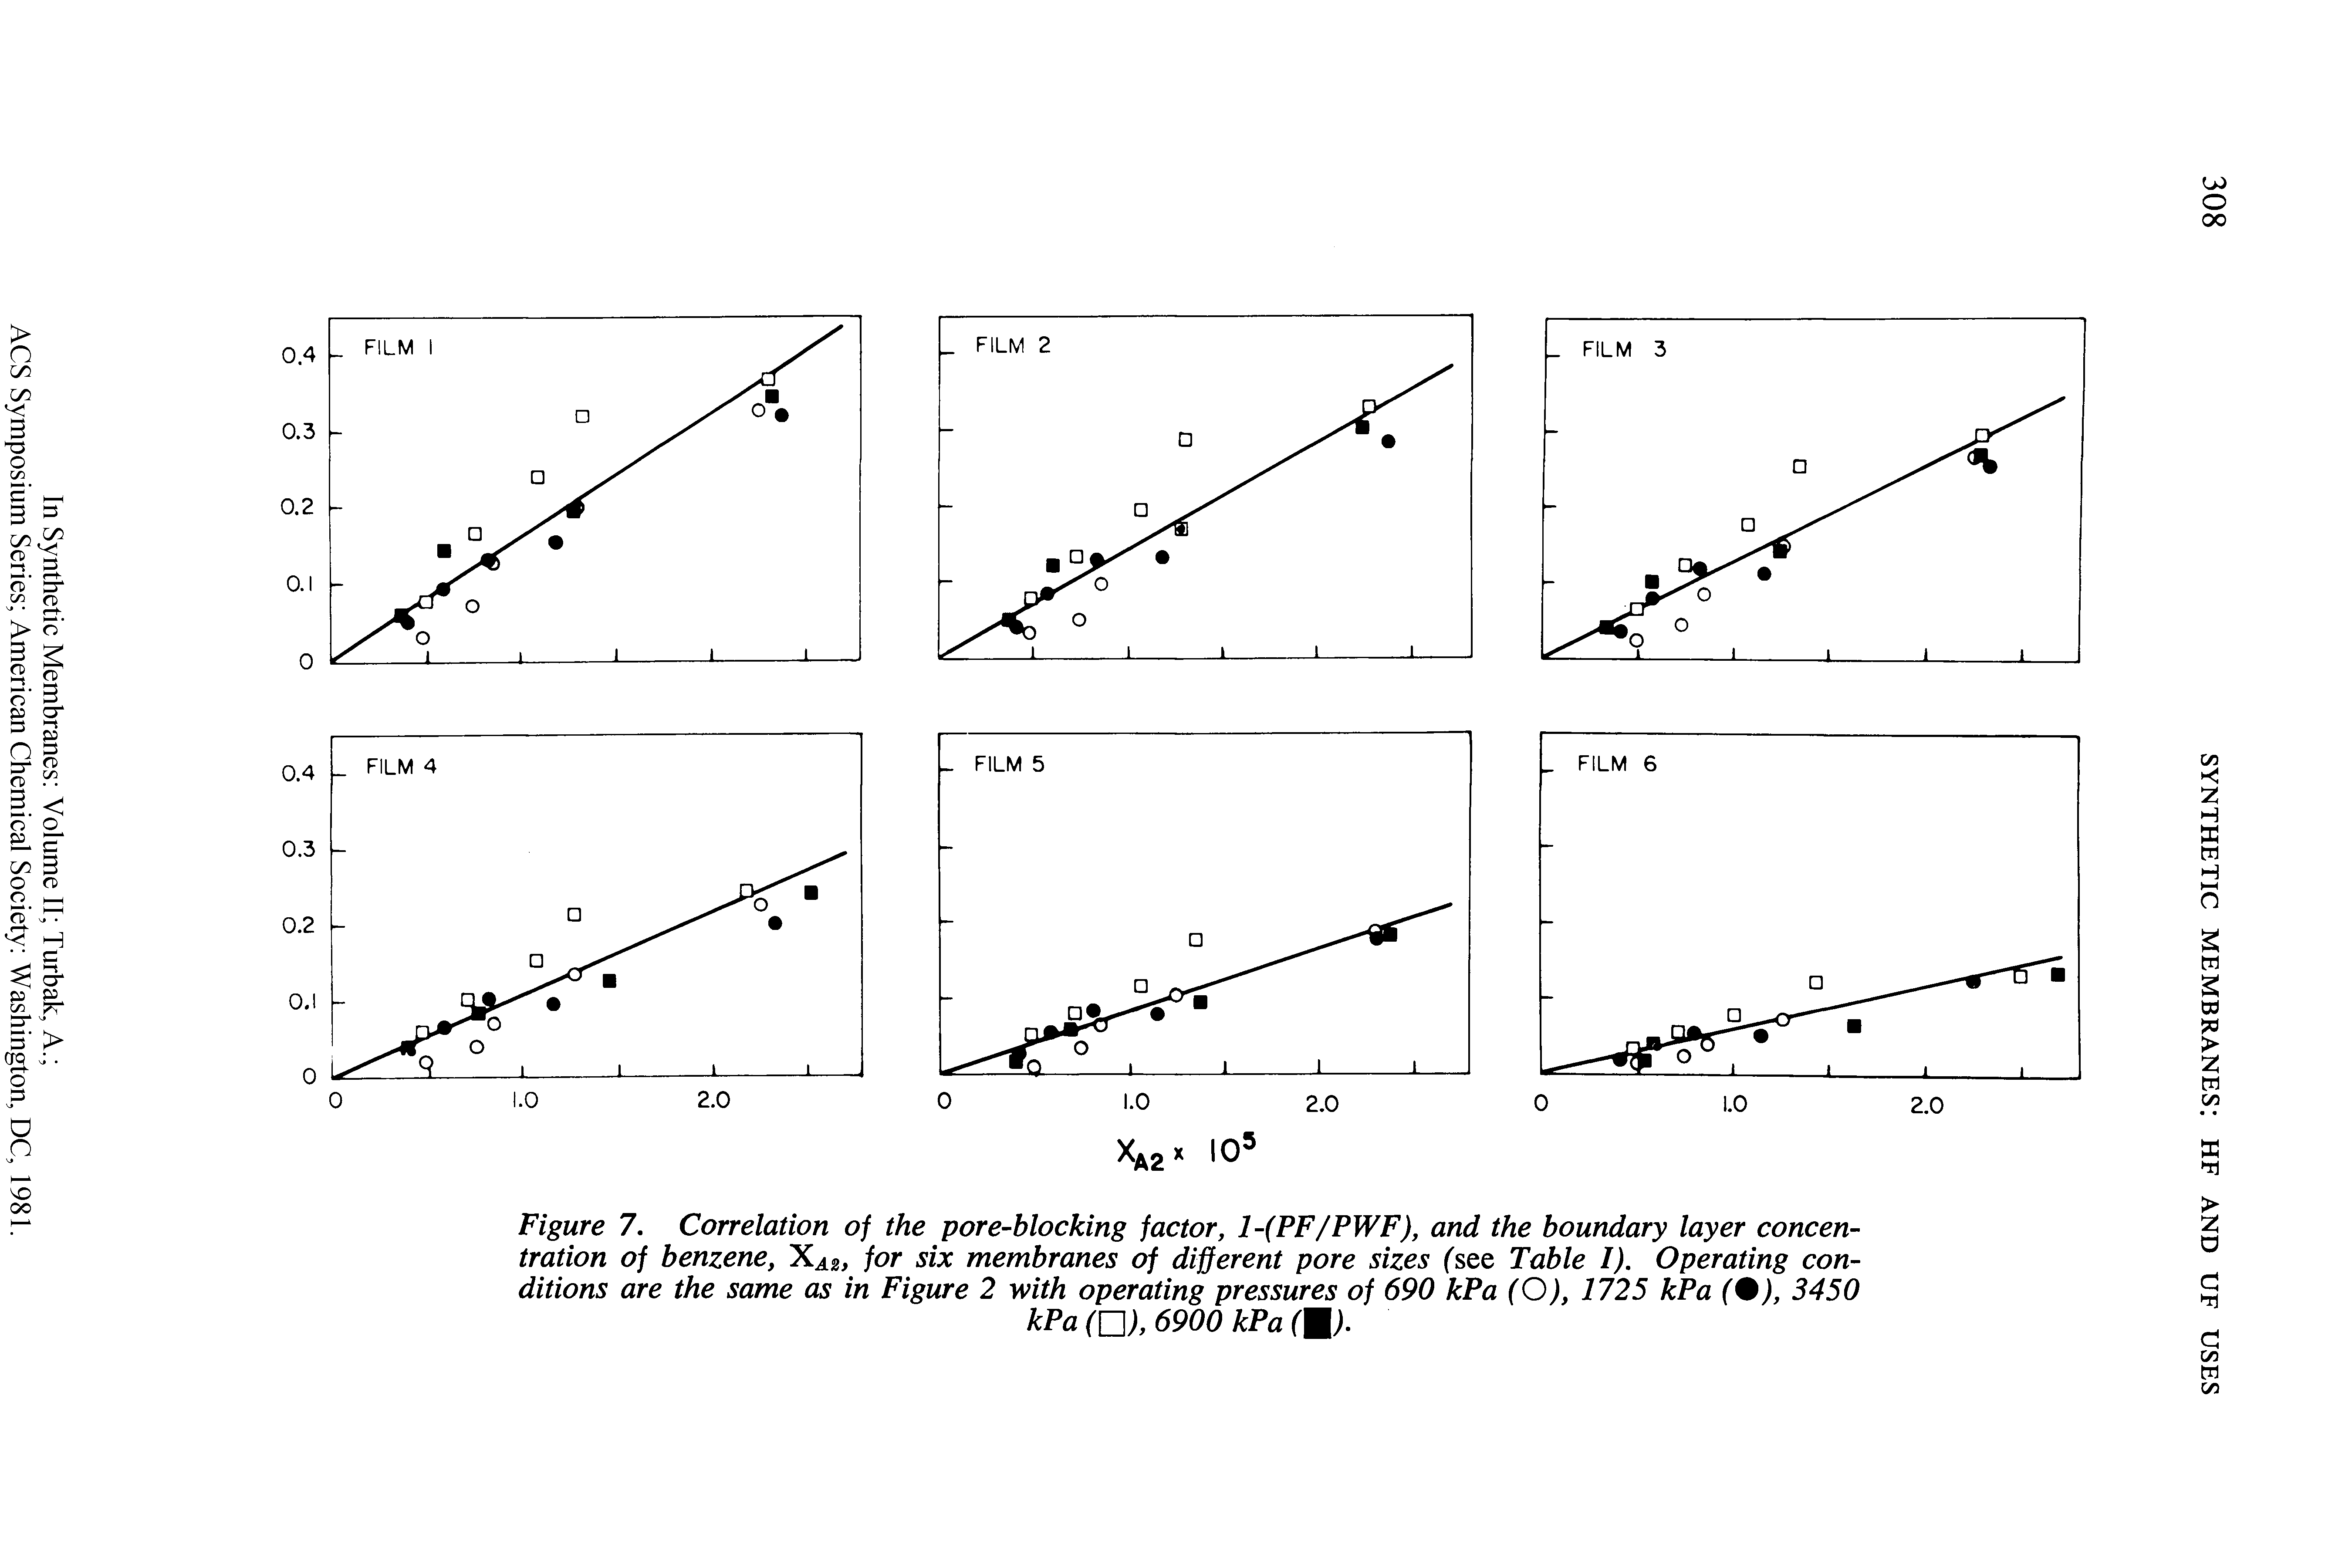 Figure 7. Correlation of the pore-blocking factor, 1-(PF/PWF), and the boundary layer concentration of benzene, X 2, for six membranes of different pore sizes fsee Table I). Operating conditions are the same as in Figure 2 with operating pressures of 690 kPa (O), 1725 kPa (0), 3450...